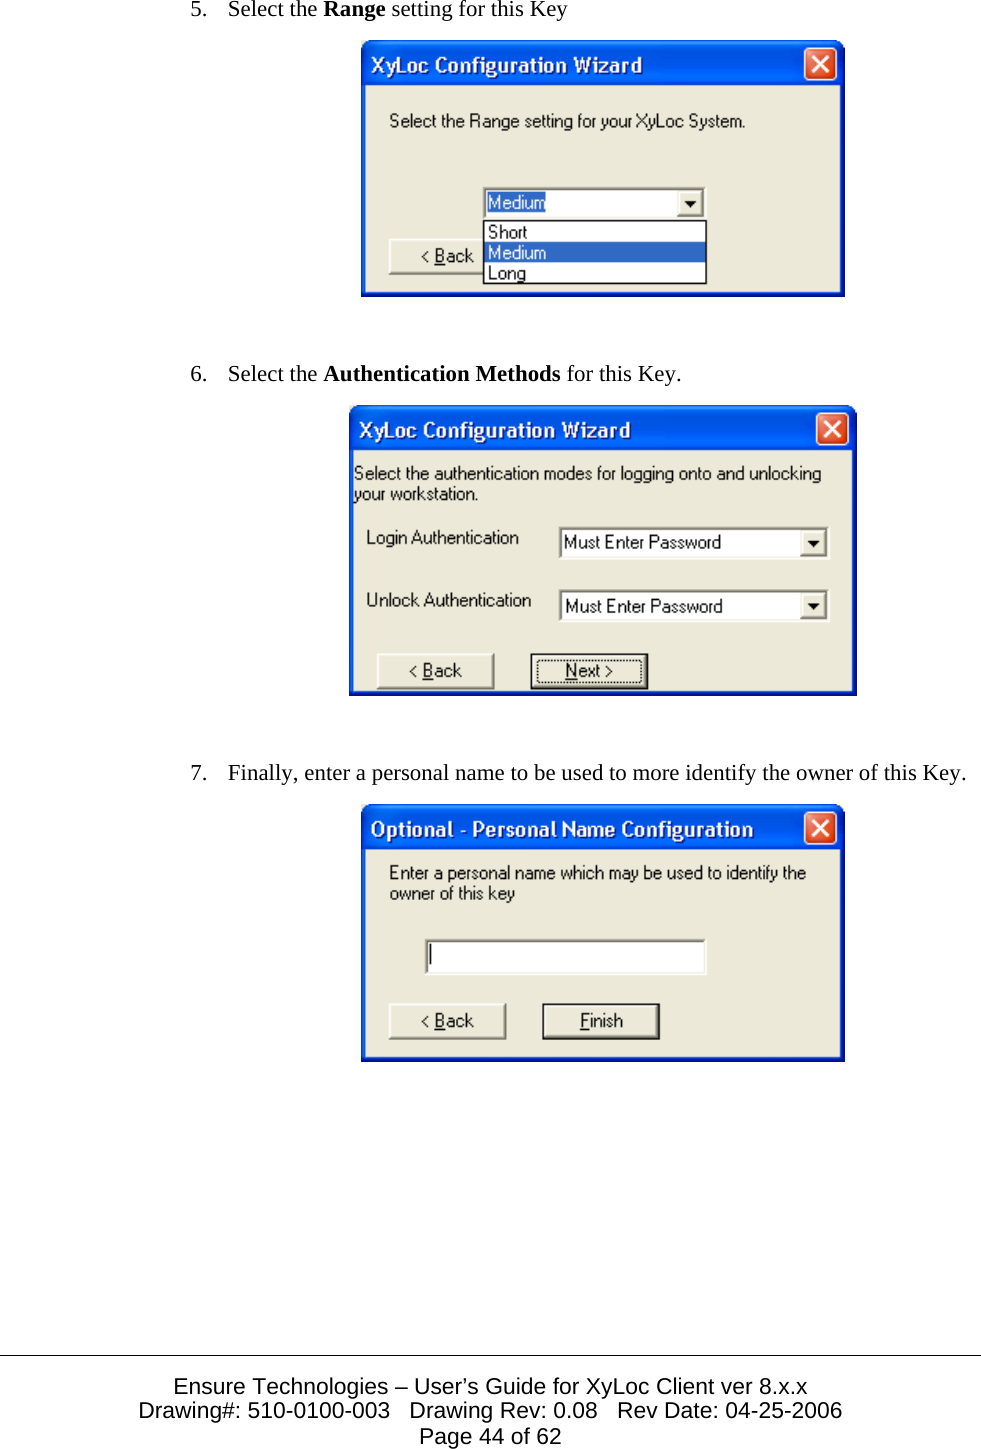  Ensure Technologies – User’s Guide for XyLoc Client ver 8.x.x Drawing#: 510-0100-003   Drawing Rev: 0.08   Rev Date: 04-25-2006 Page 44 of 62 5. Select the Range setting for this Key    6. Select the Authentication Methods for this Key.    7. Finally, enter a personal name to be used to more identify the owner of this Key.    